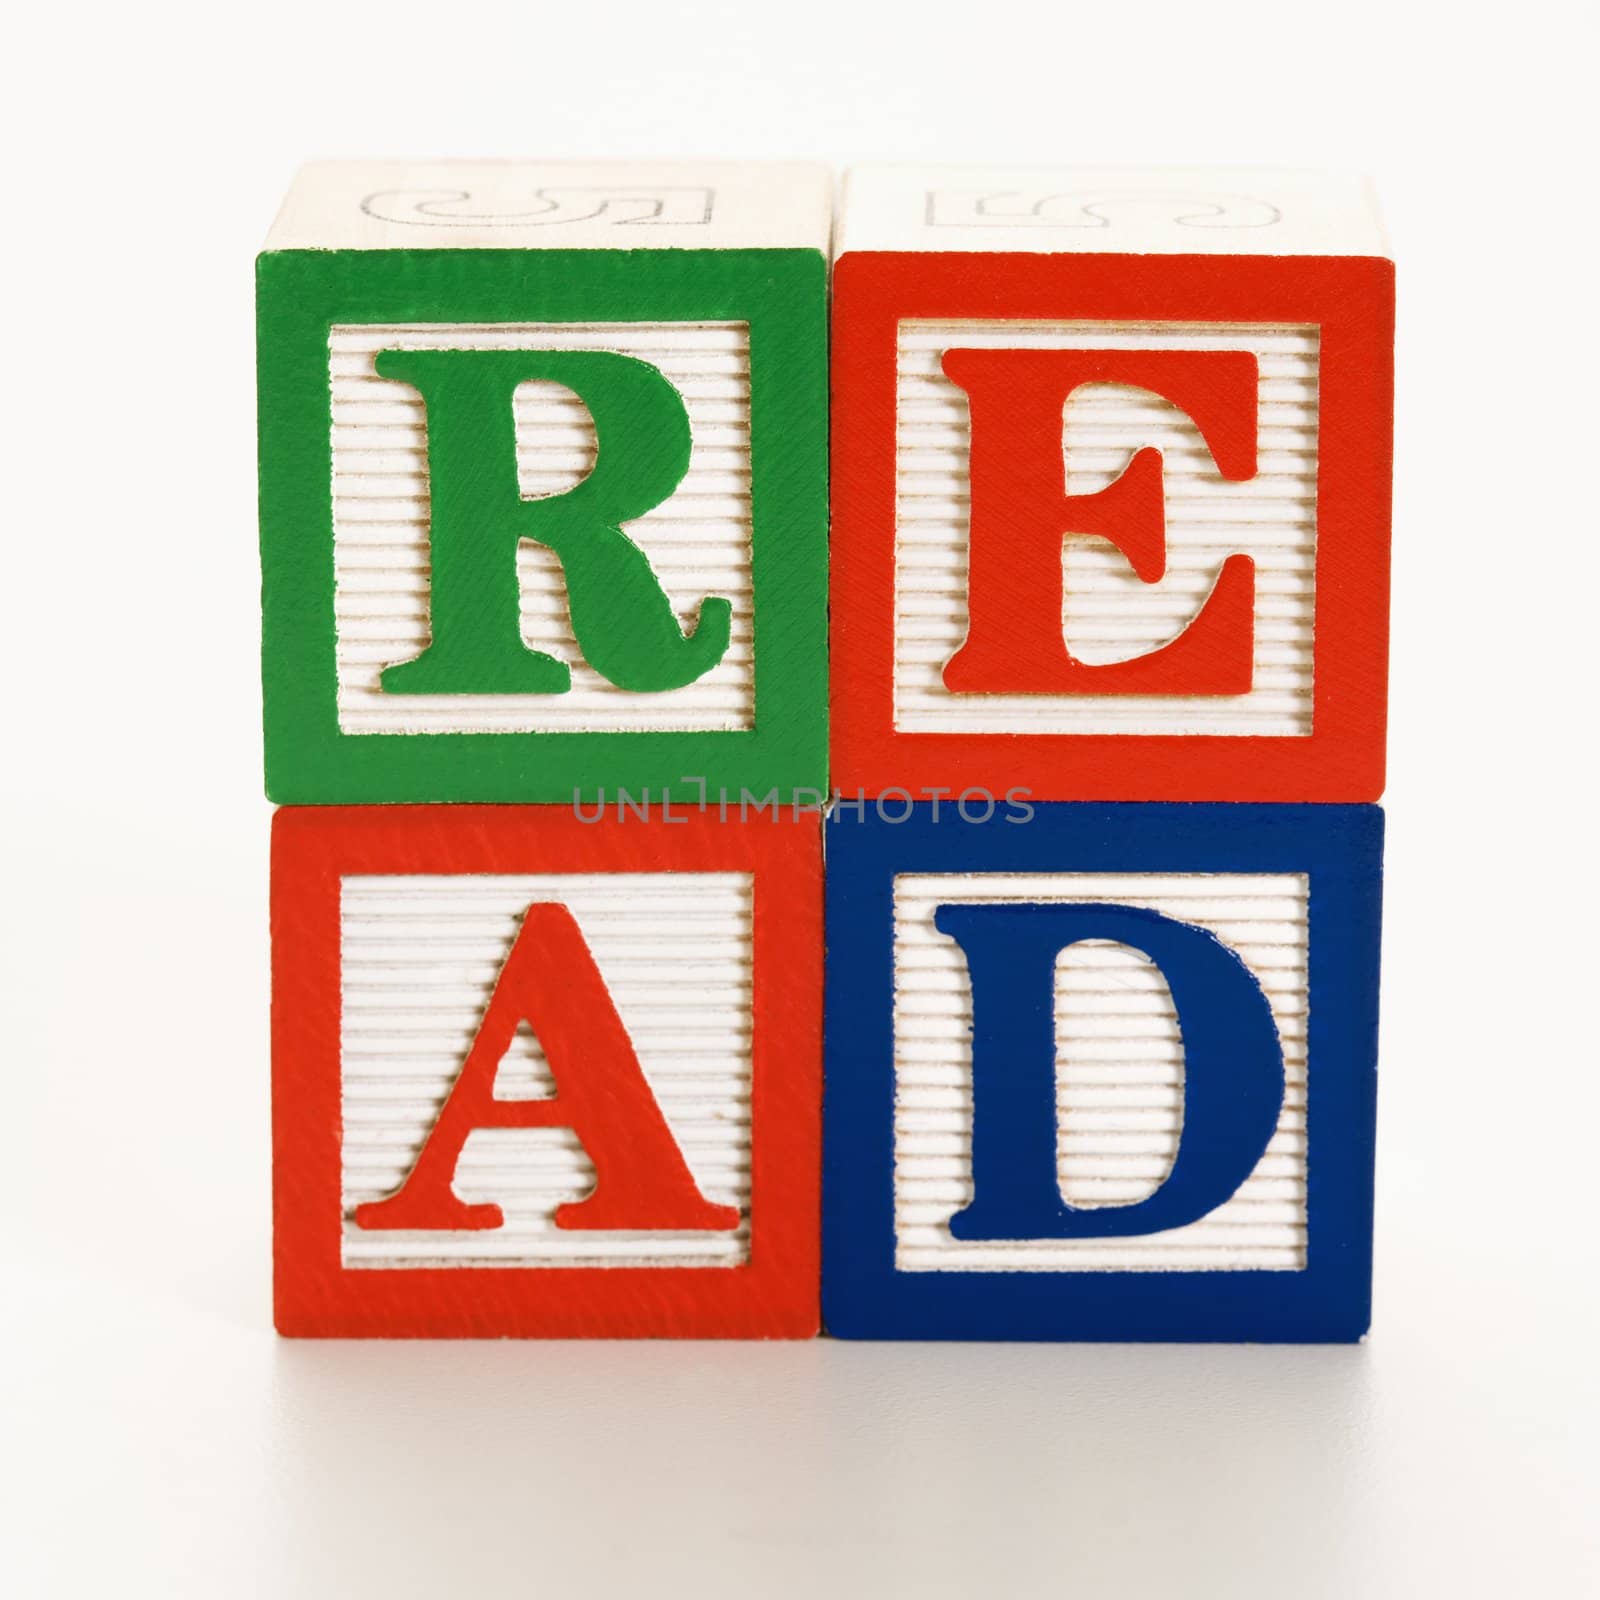 Stack of alphabet toy building blocks spelling the word read.